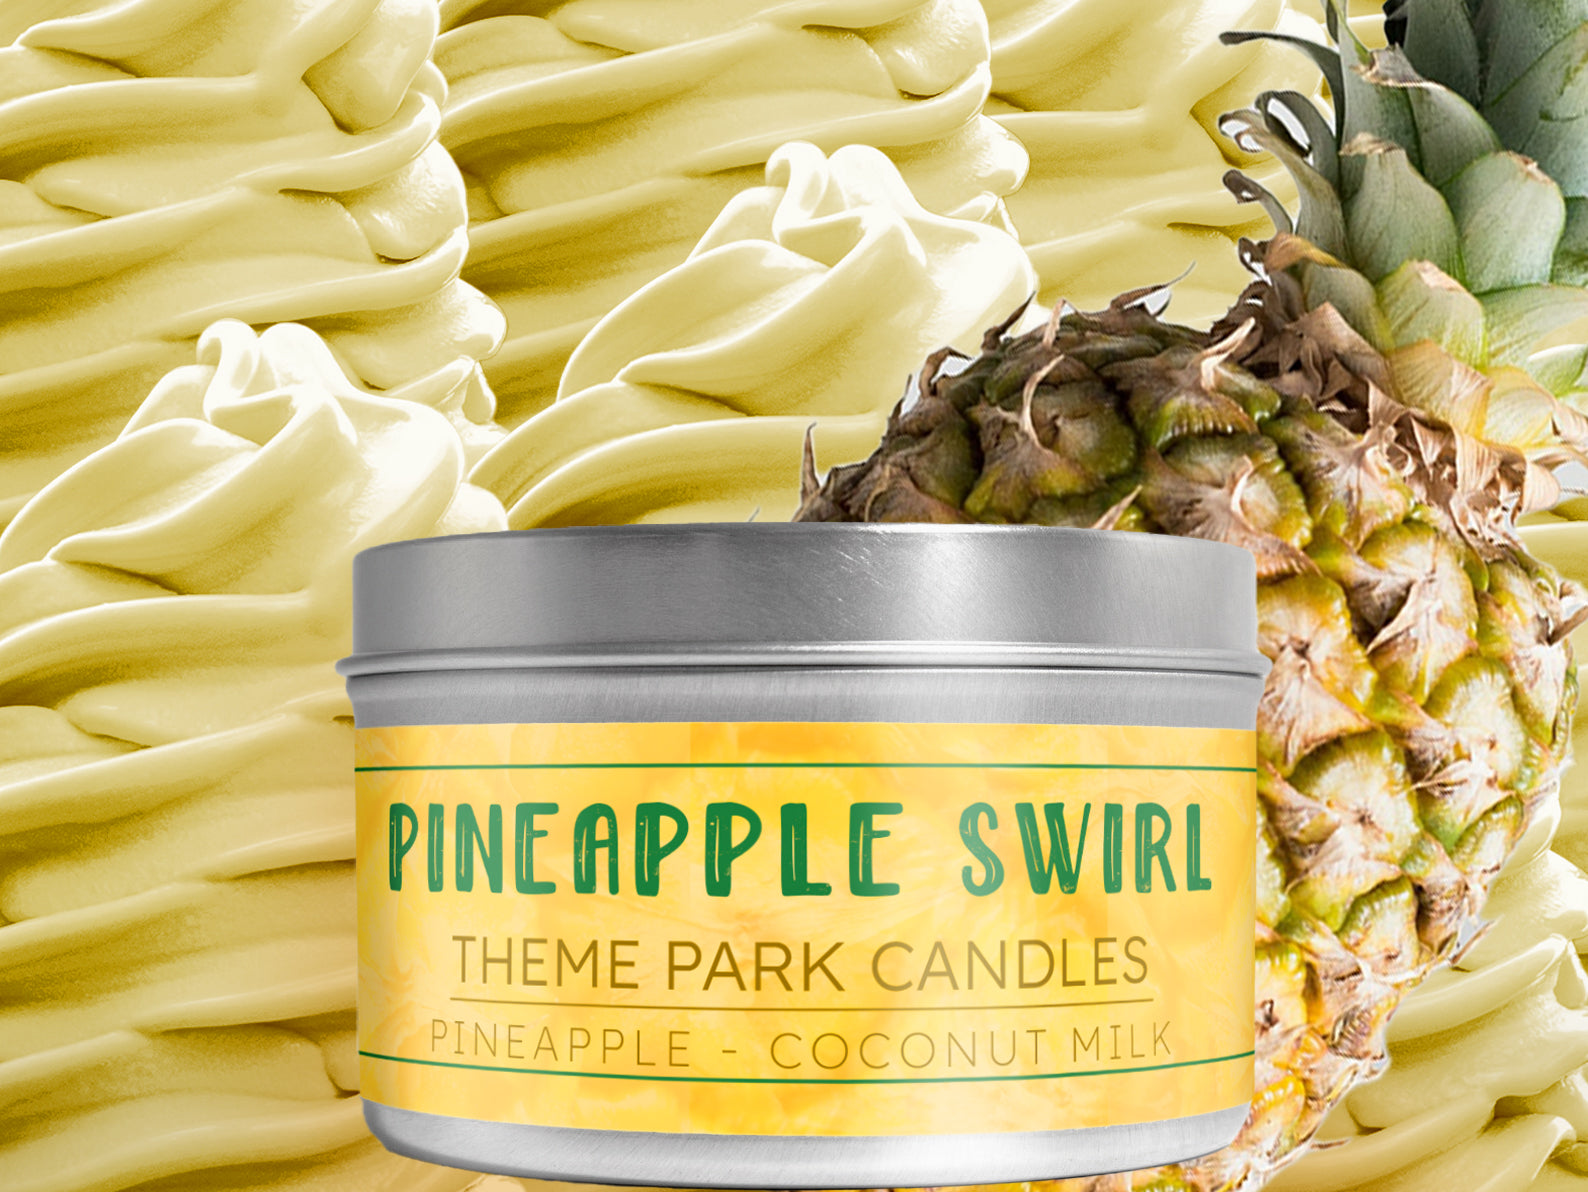 Pineapple Swirl Candle | Theme Park Candles